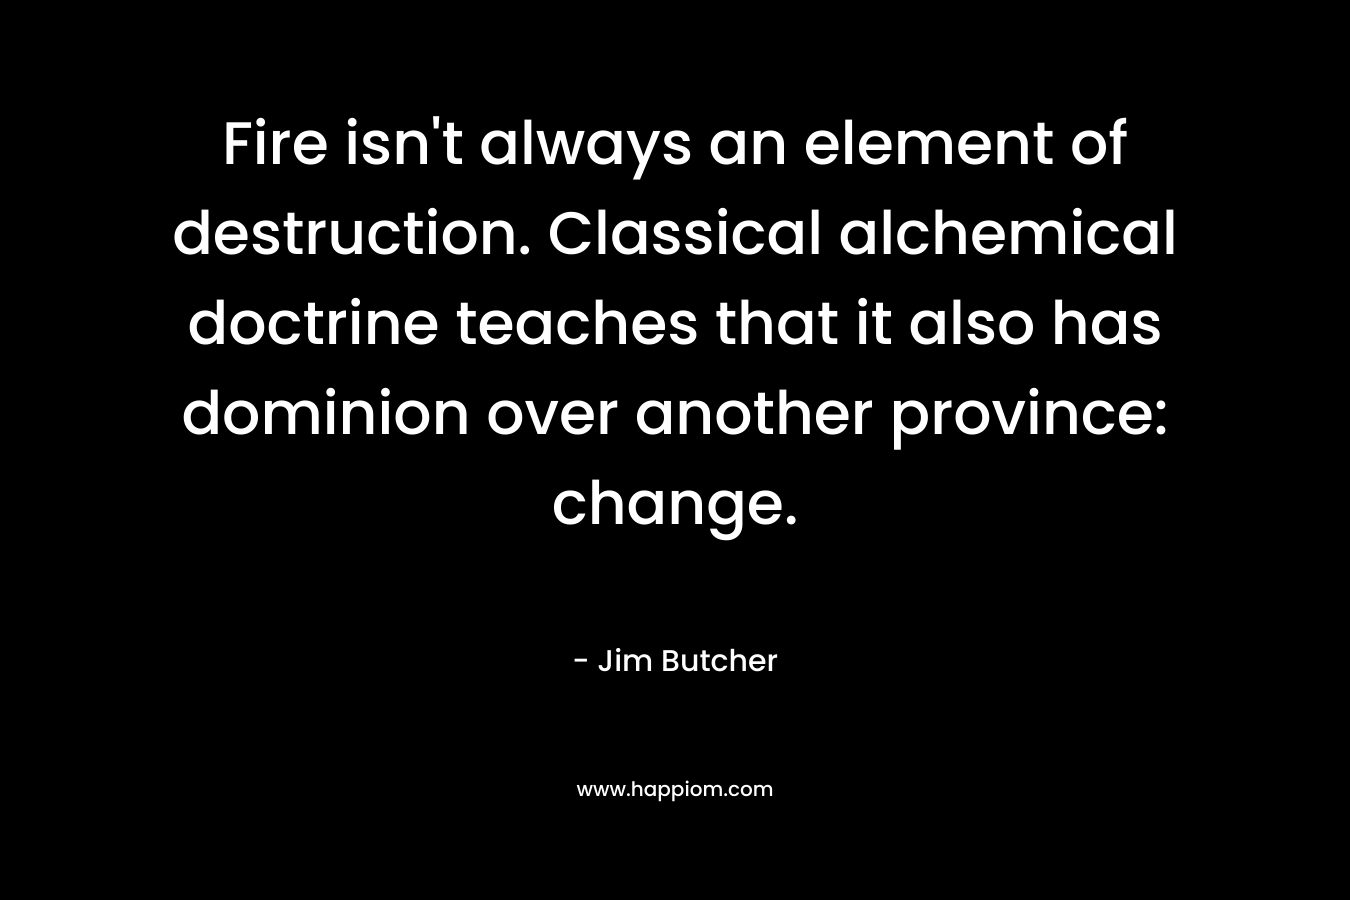 Fire isn’t always an element of destruction. Classical alchemical doctrine teaches that it also has dominion over another province: change. – Jim Butcher